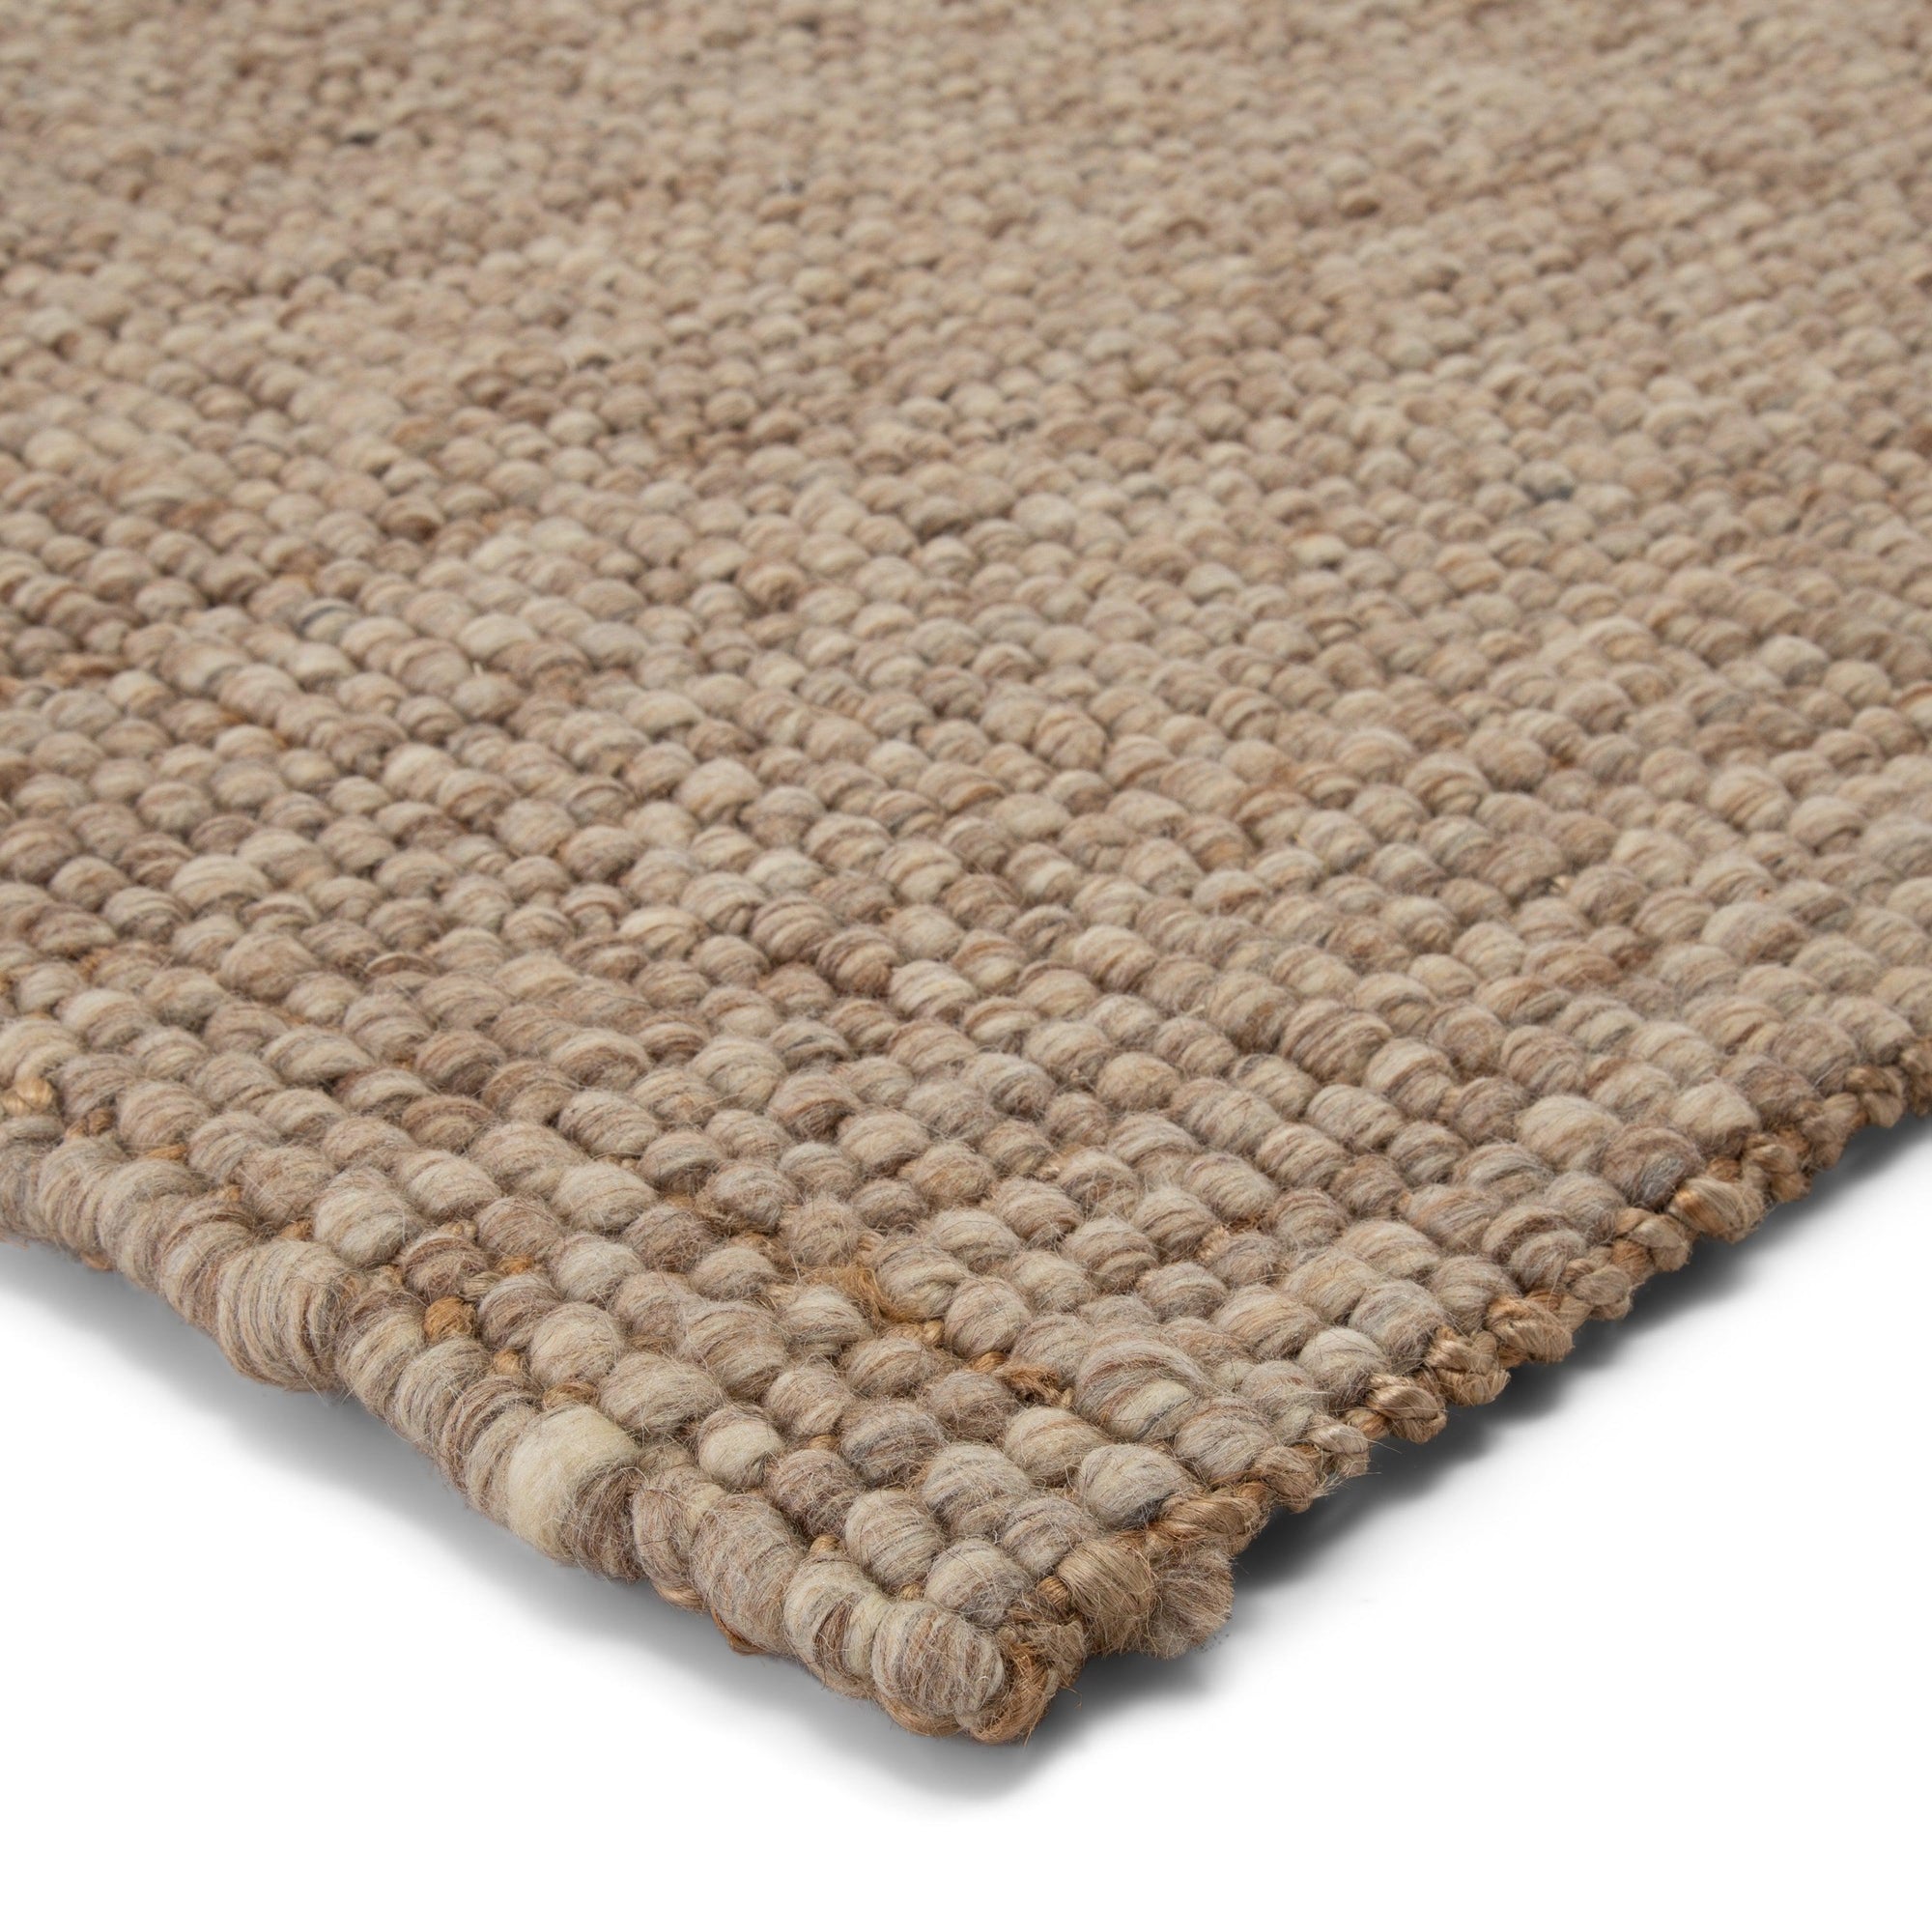 Rugs by Roo | Jaipur Living Oceana Natural Solid Light Gray Tan Area Rug-RUG145819